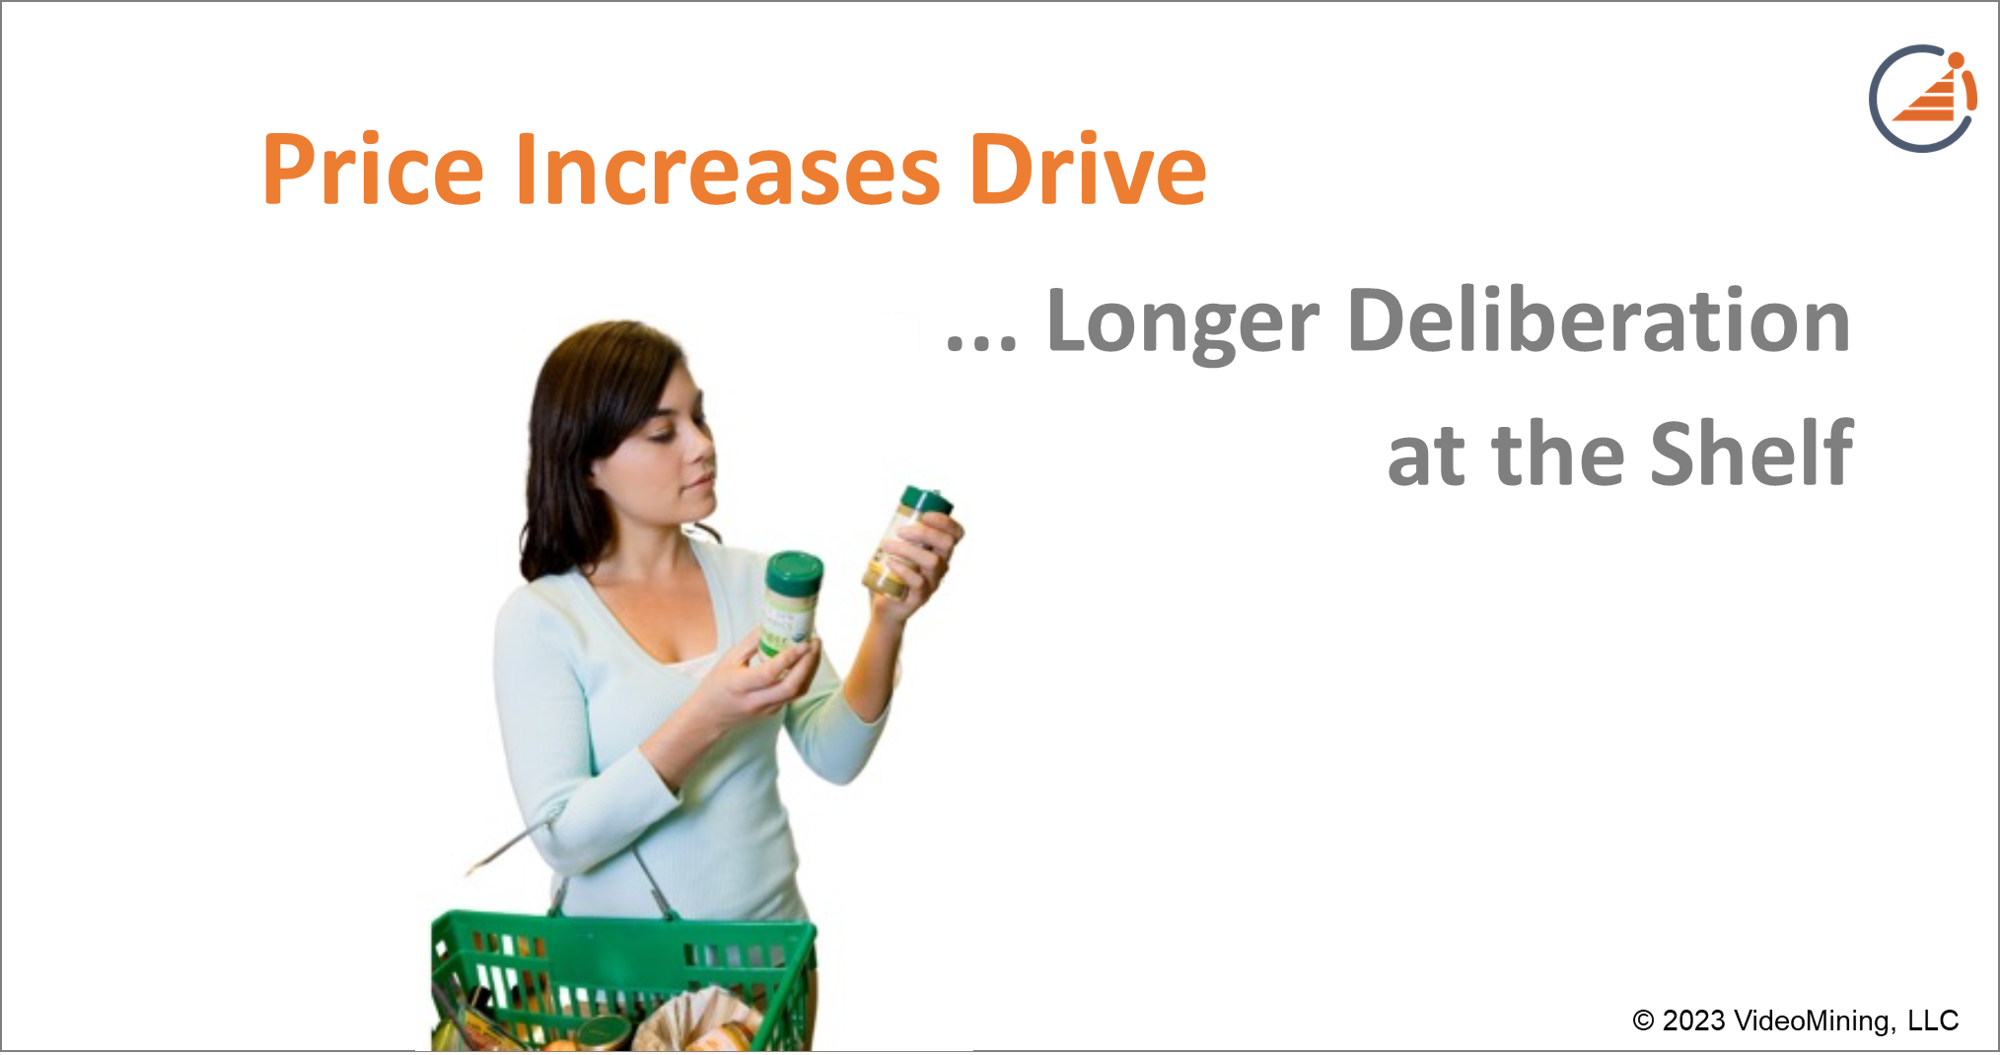 Price Increases Drive Longer Deliberation at the Shelf